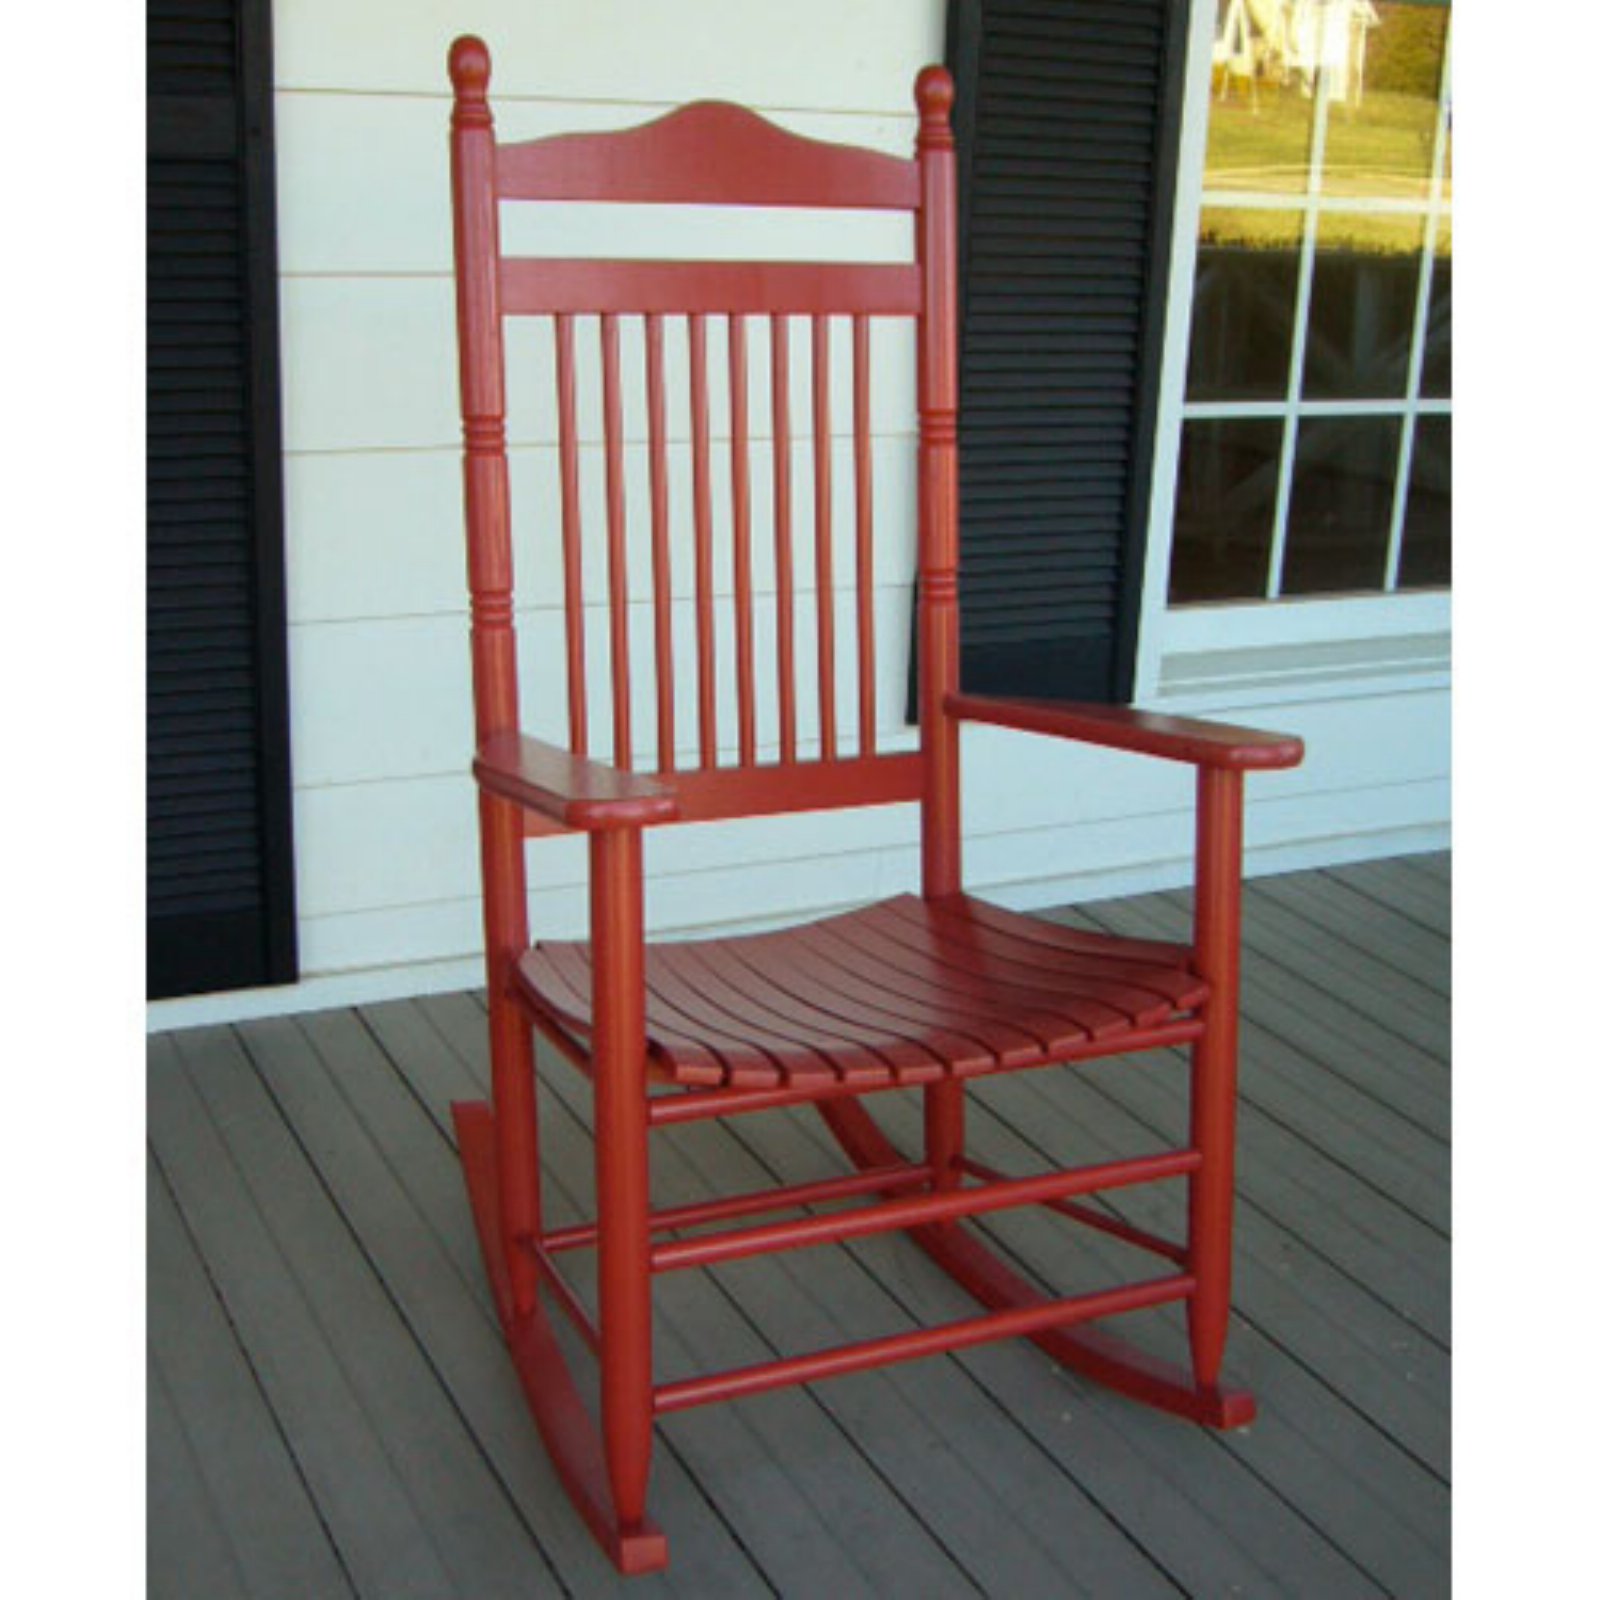 Dixie Seating Calabash Indoor/Outdoor Spindle Ready-To-Assemble Rocking Chair - image 3 of 8